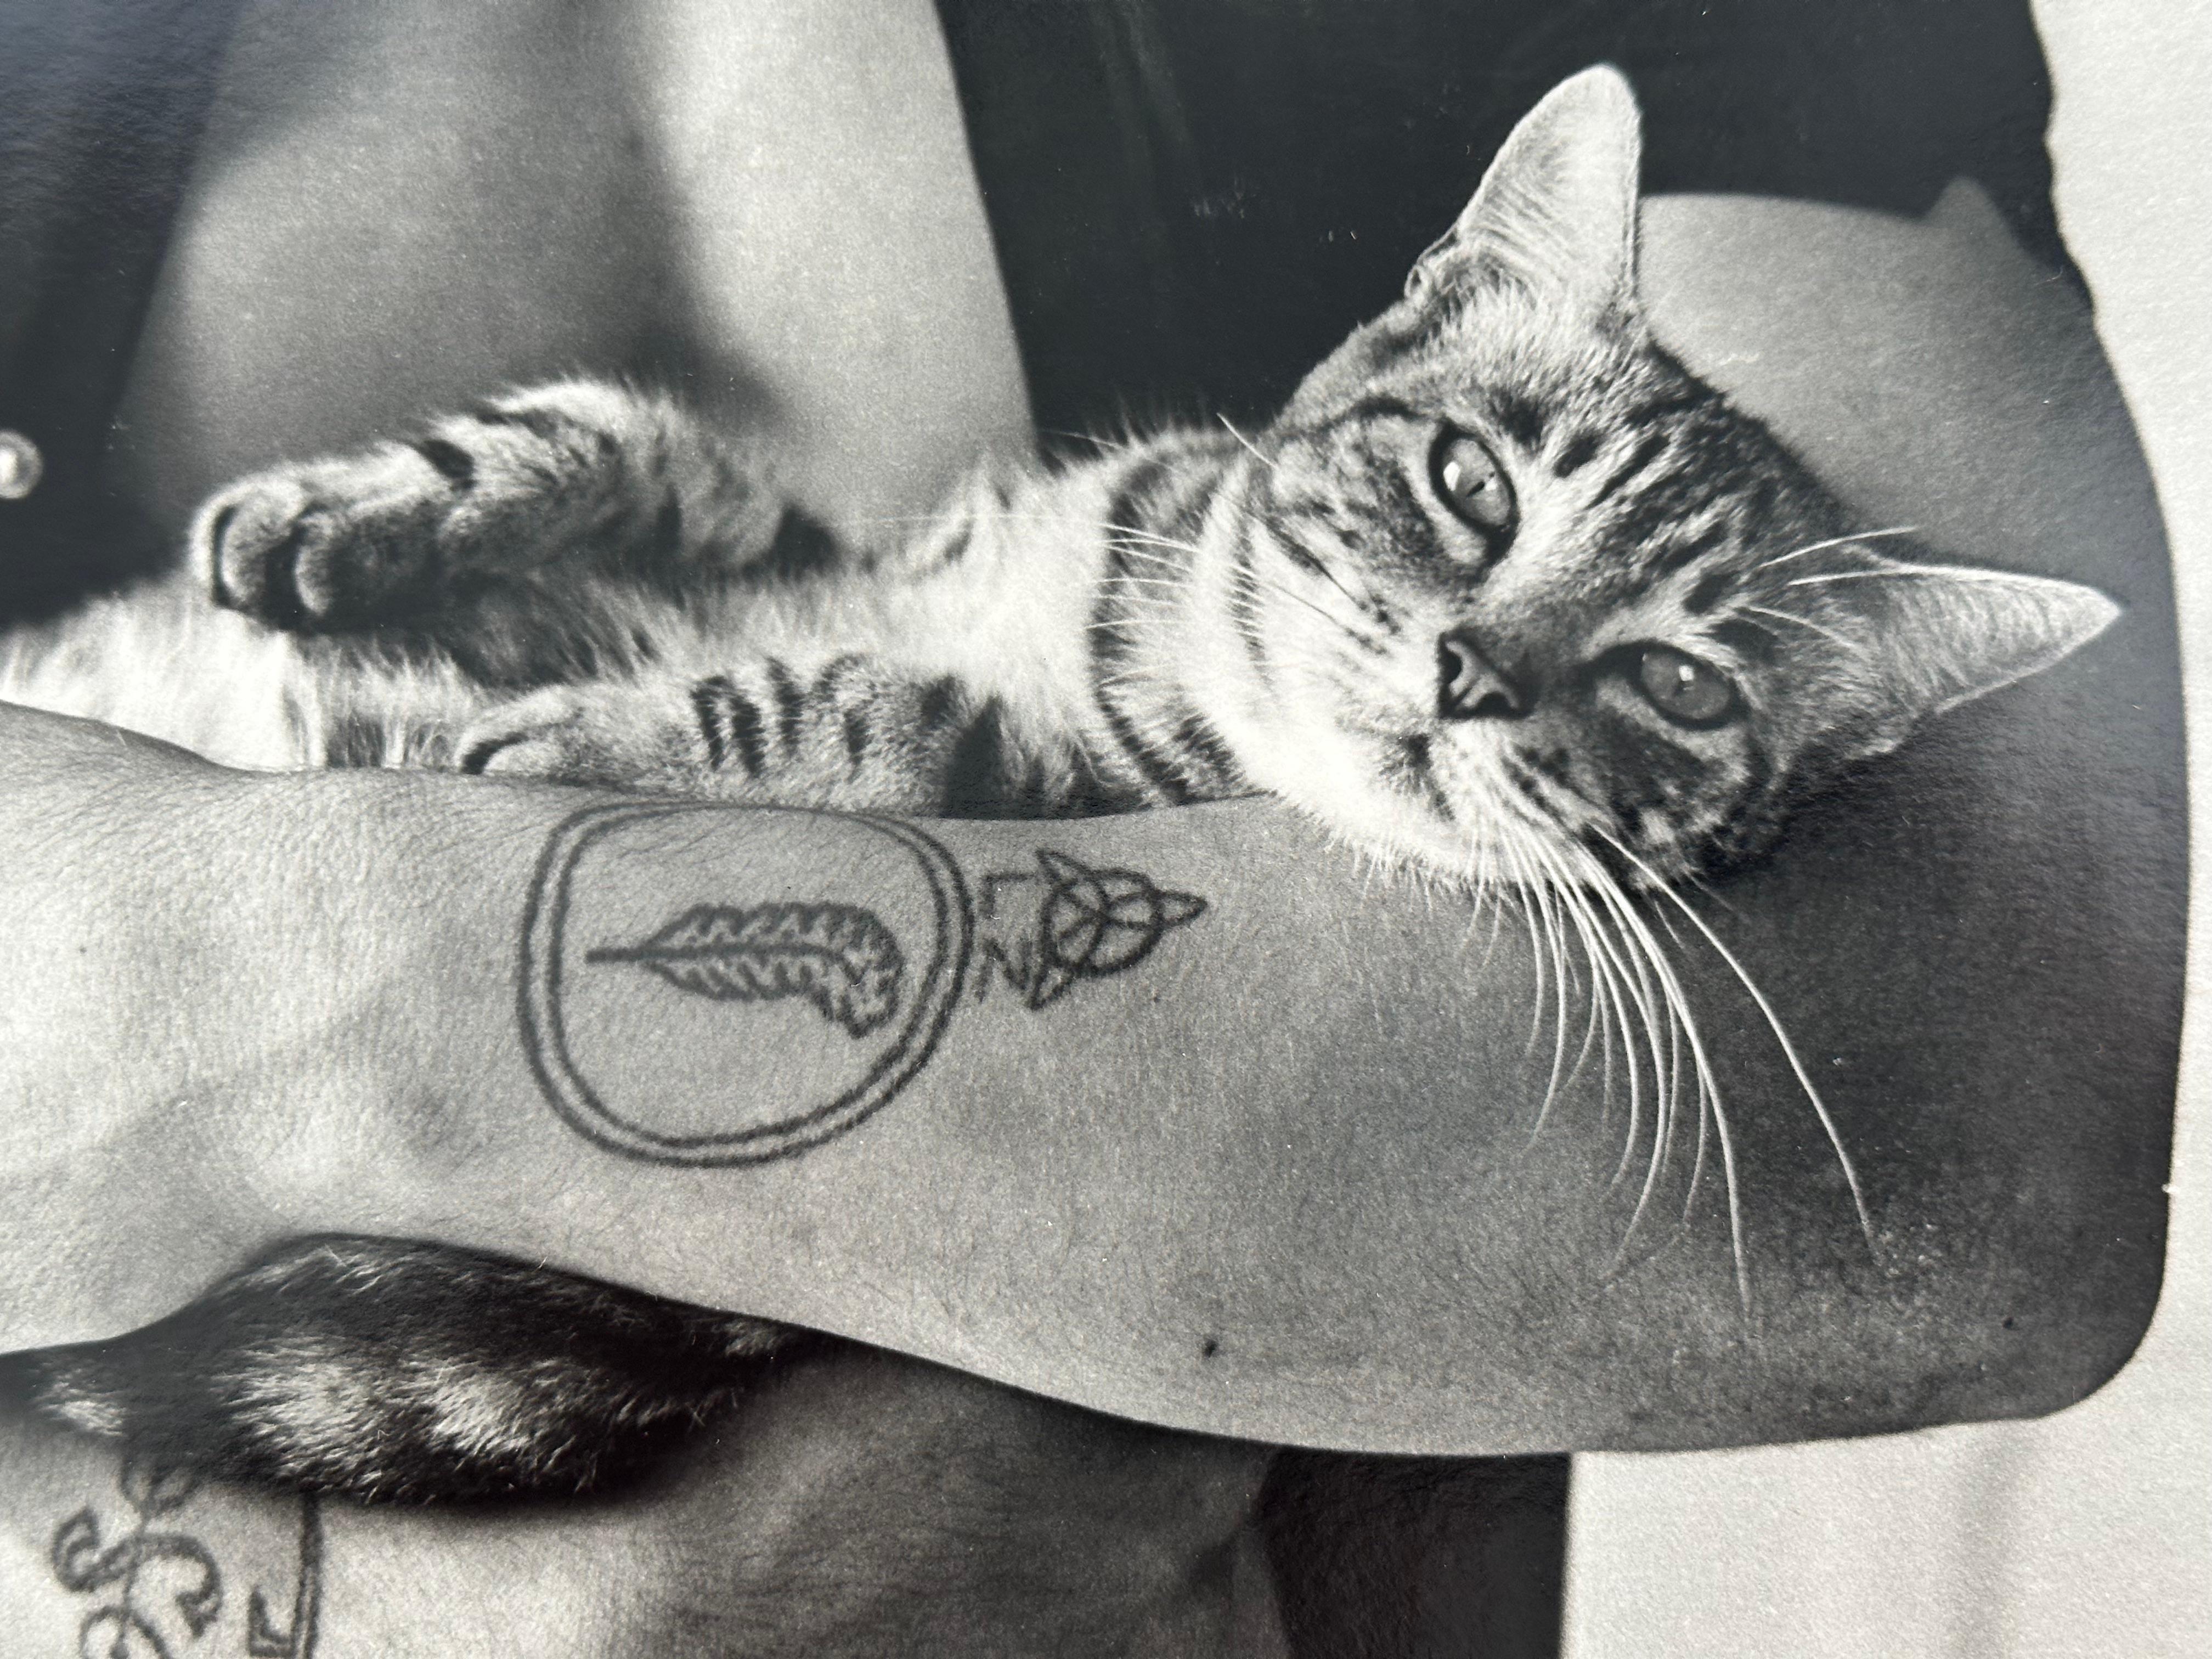 Man with Cat - American Modern Photograph by Christopher Makos